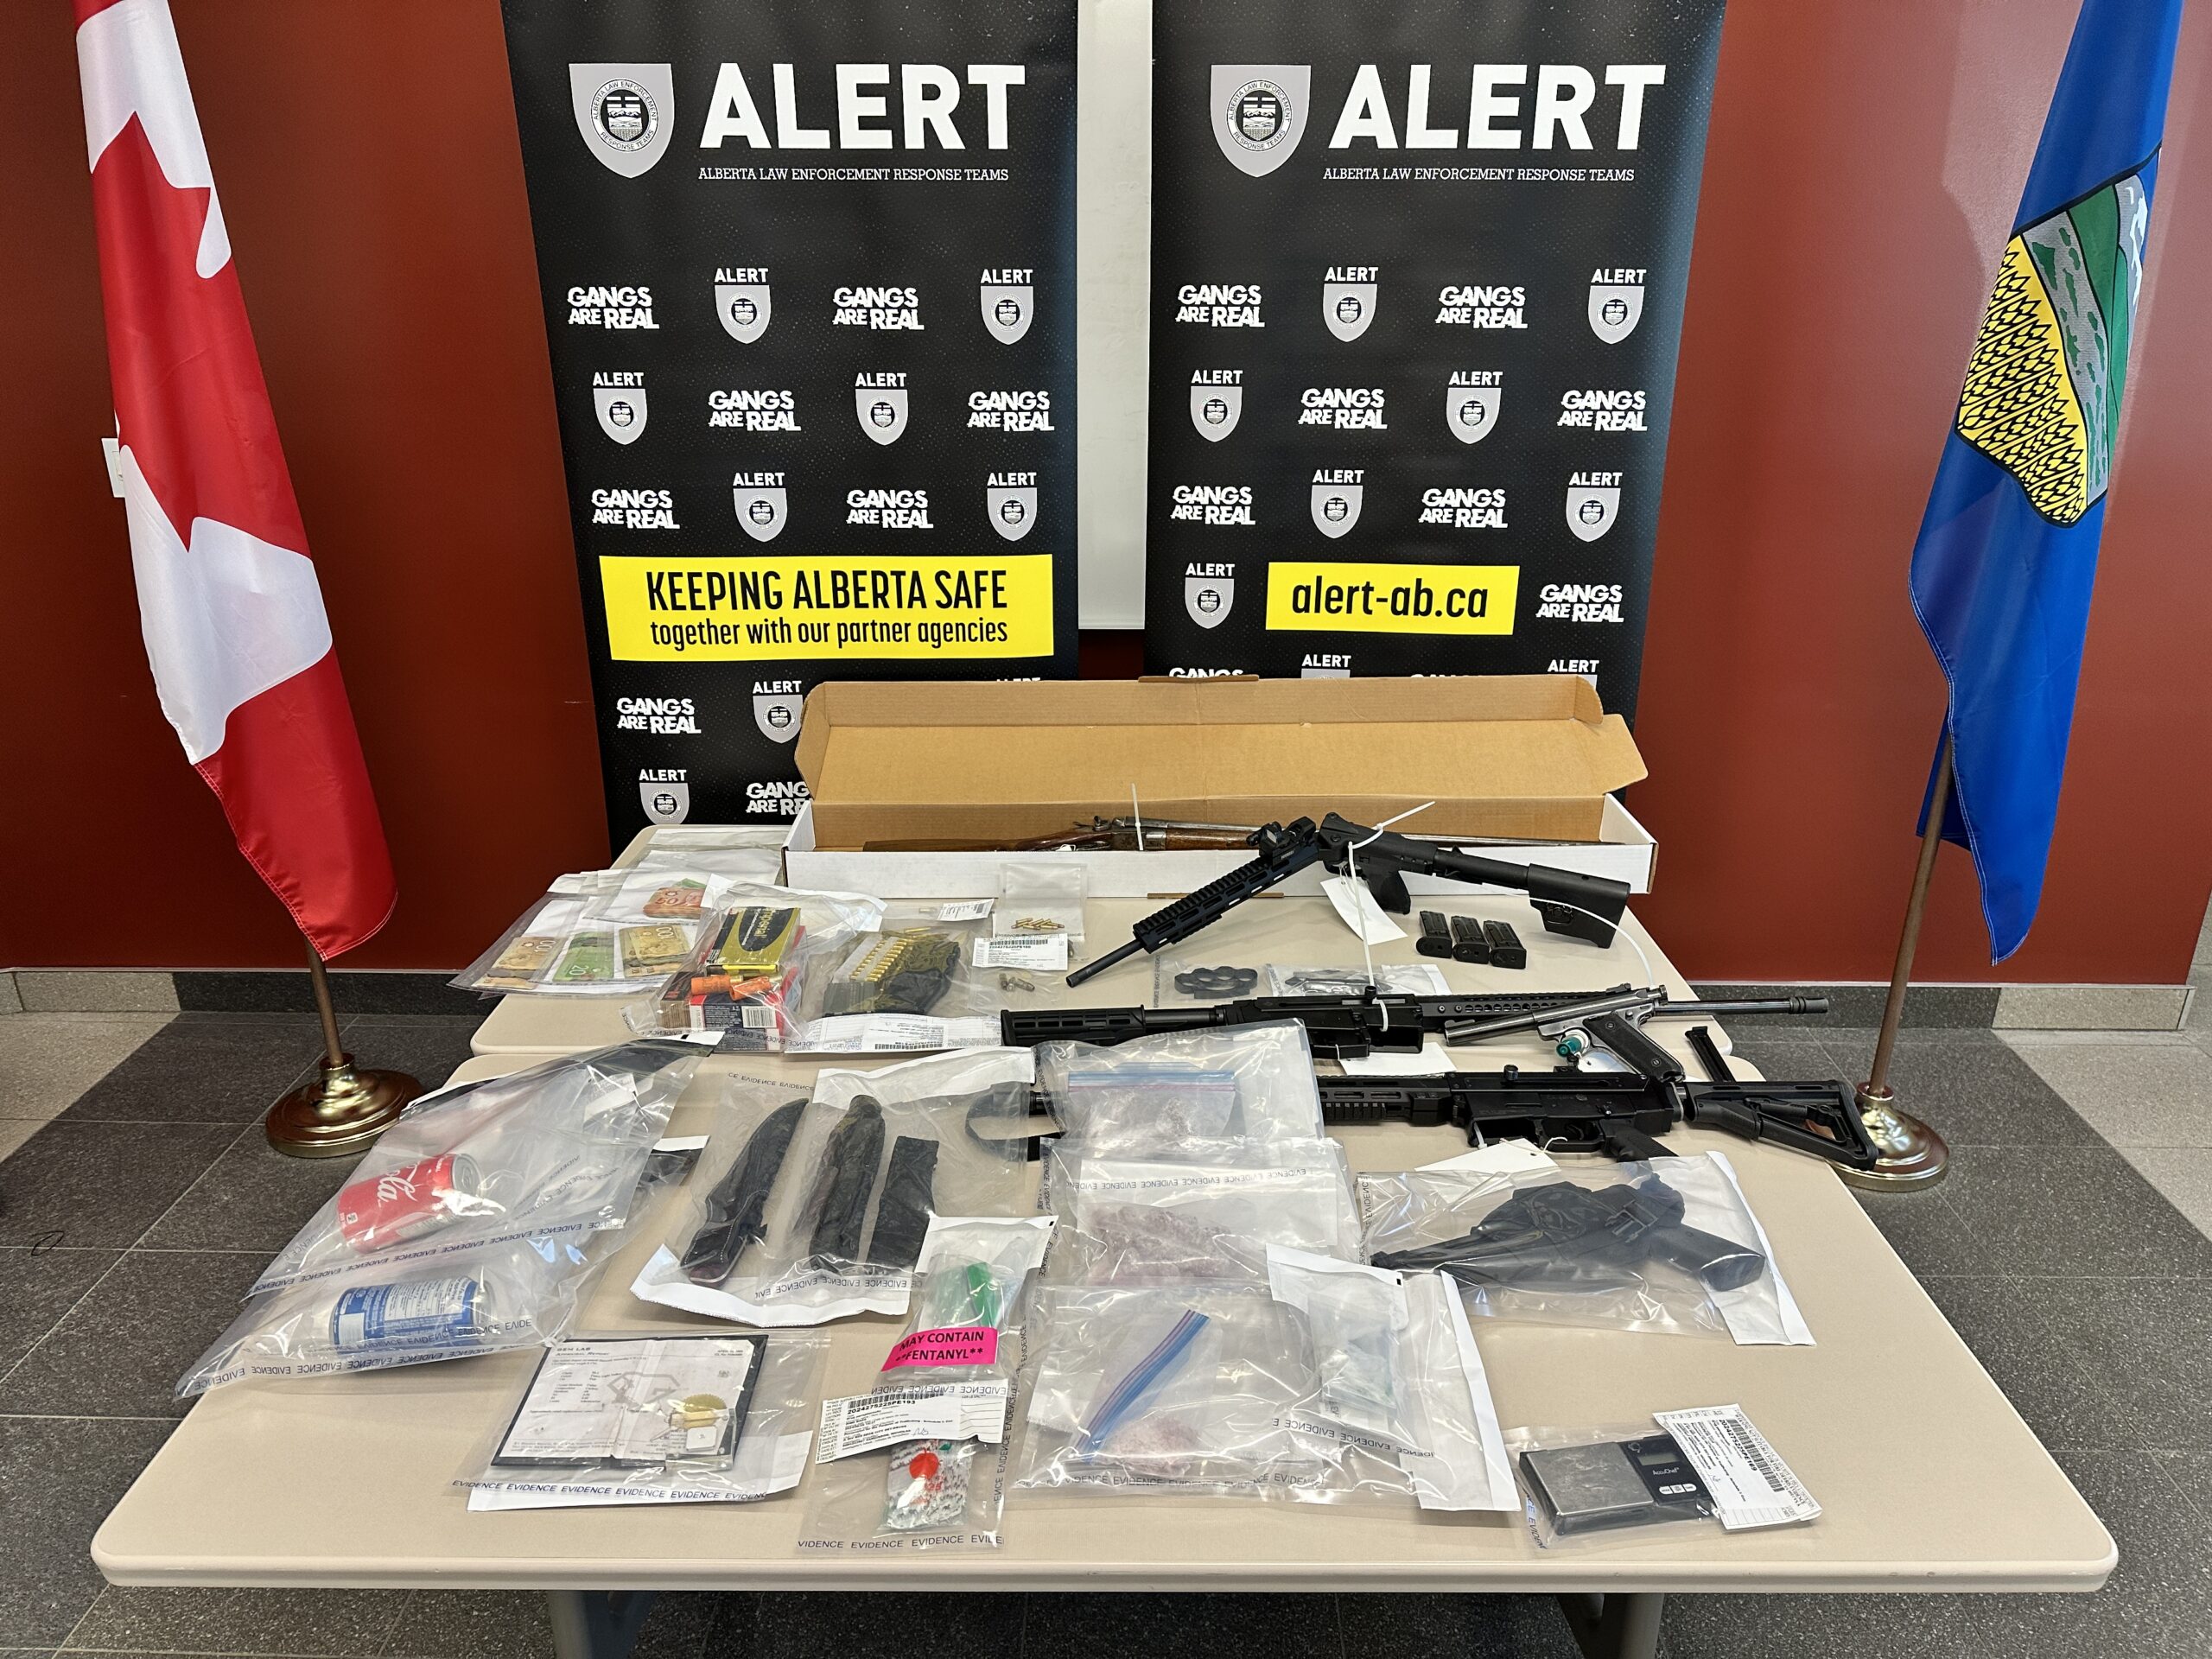 More drugs and firearms seized in relation to recent Red Deer bust